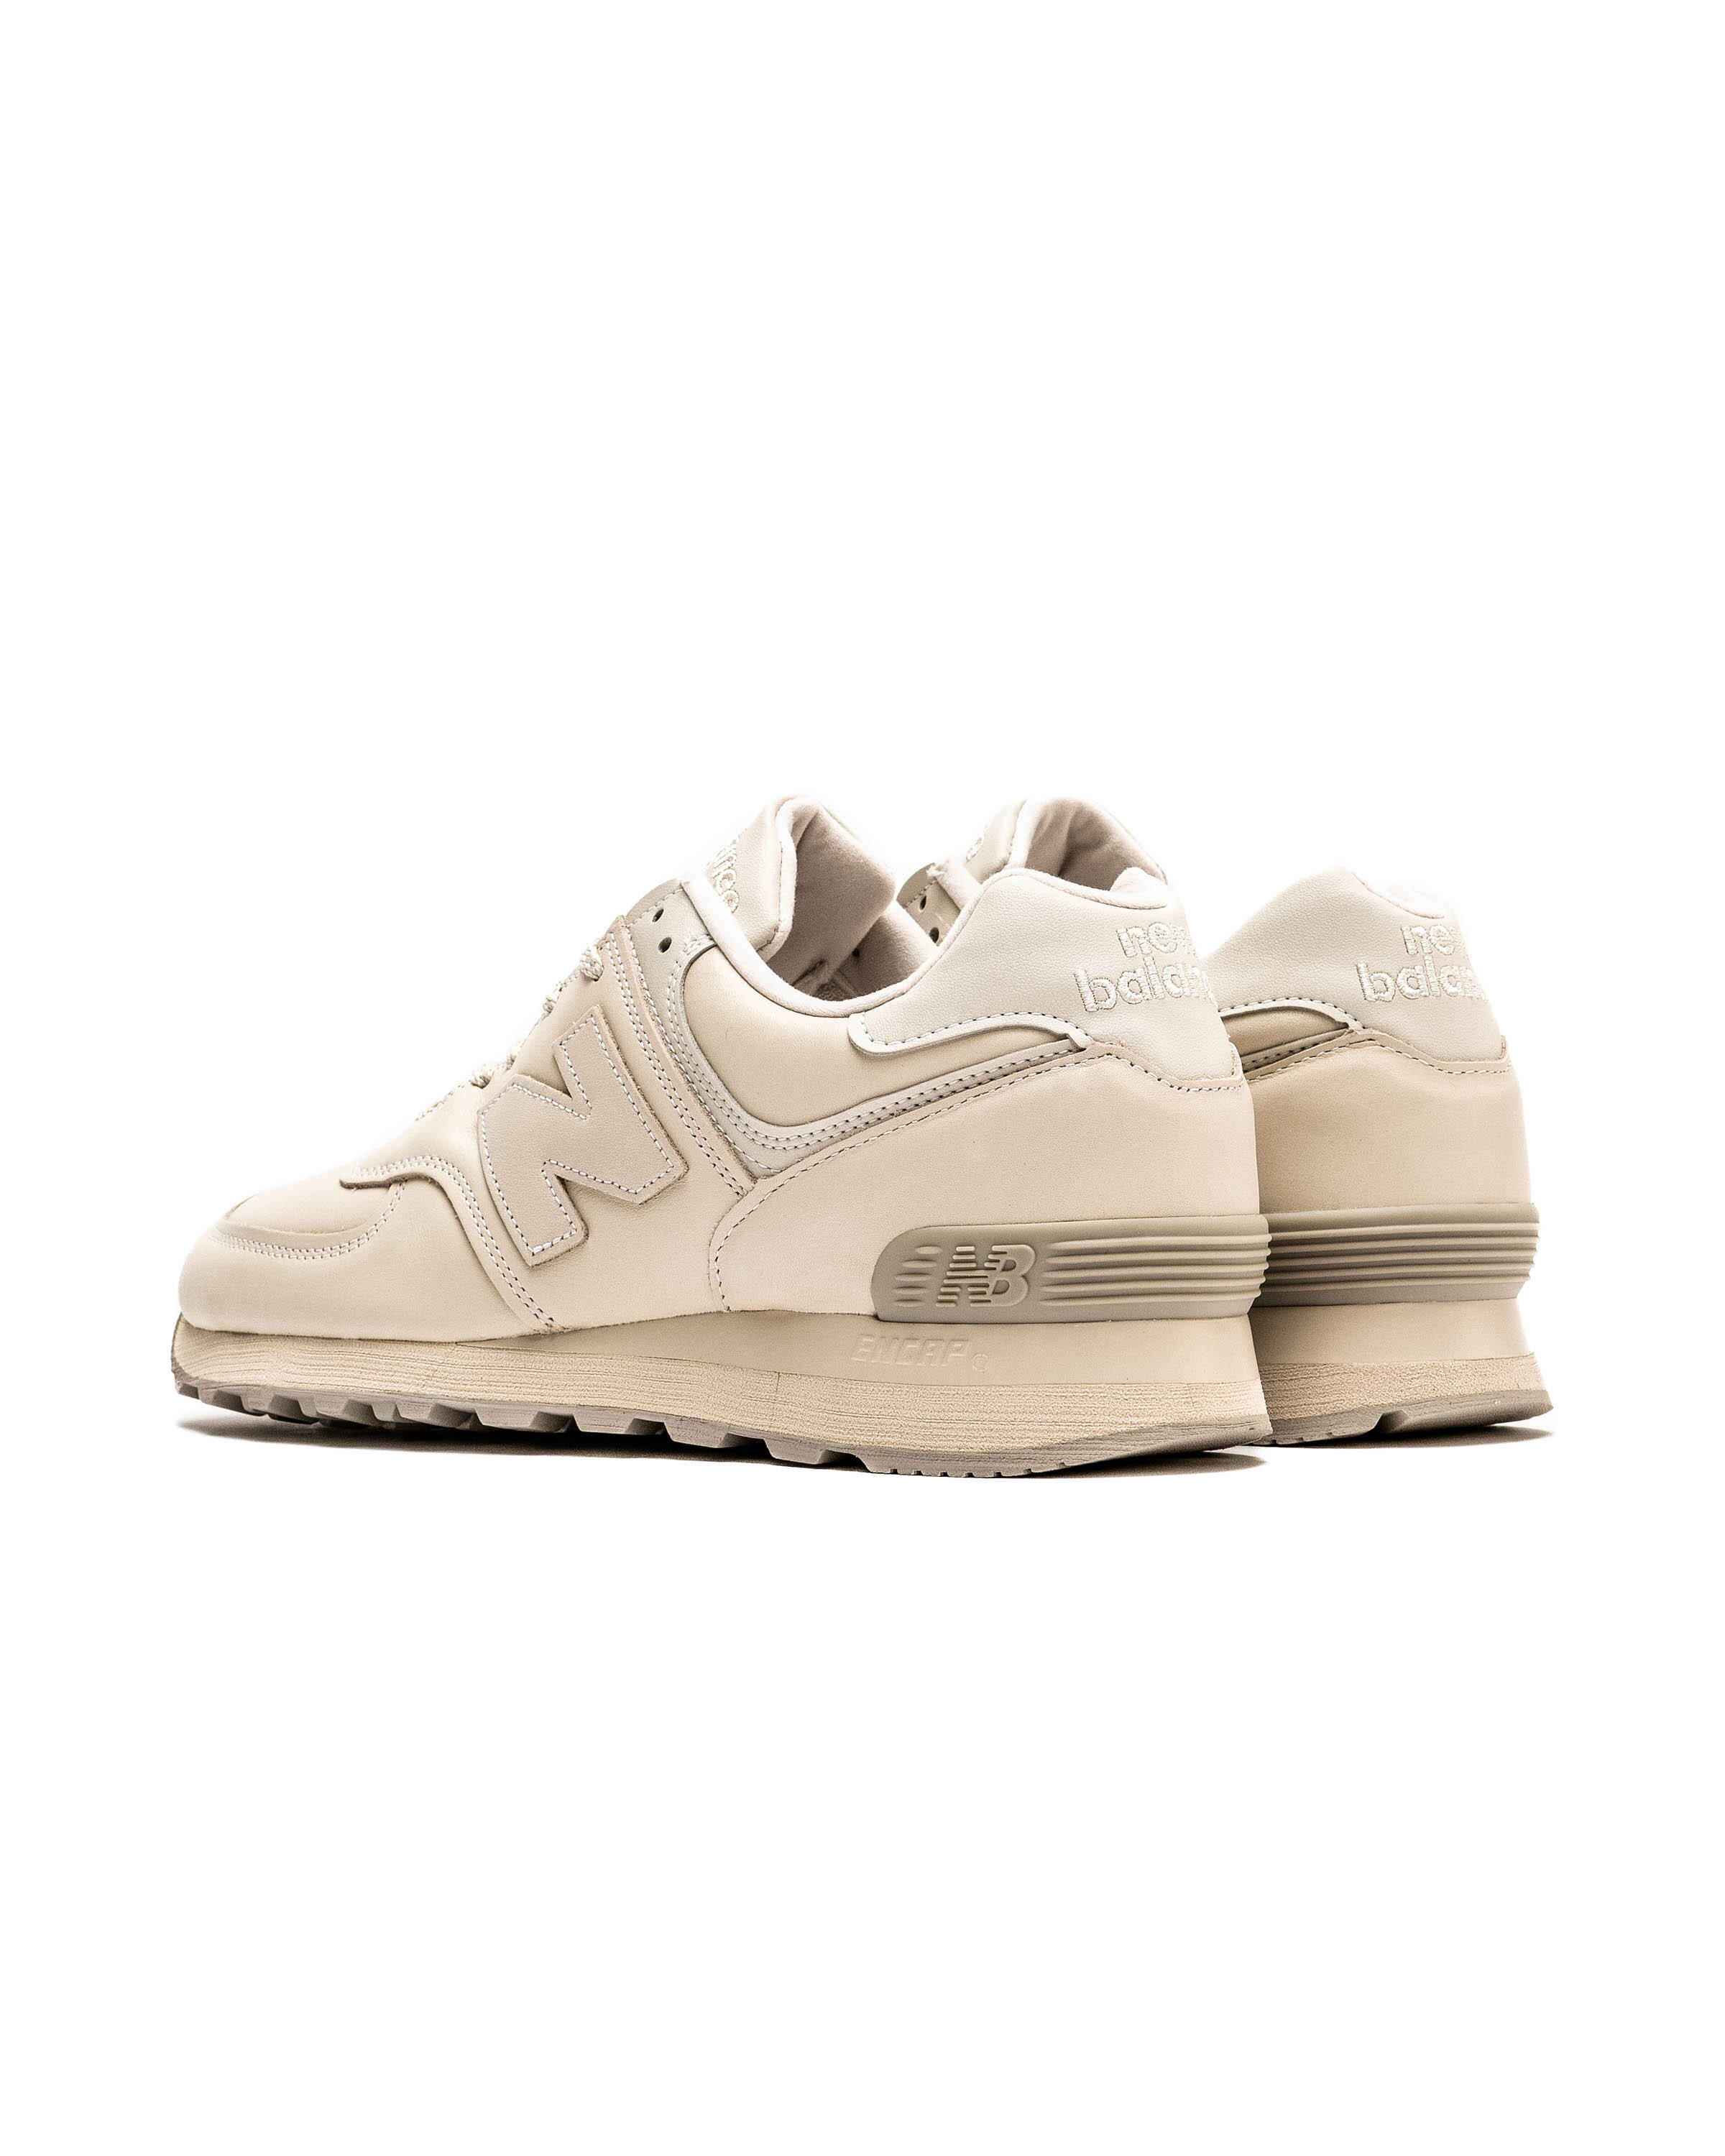 New Balance OU 576 OW - Made in England